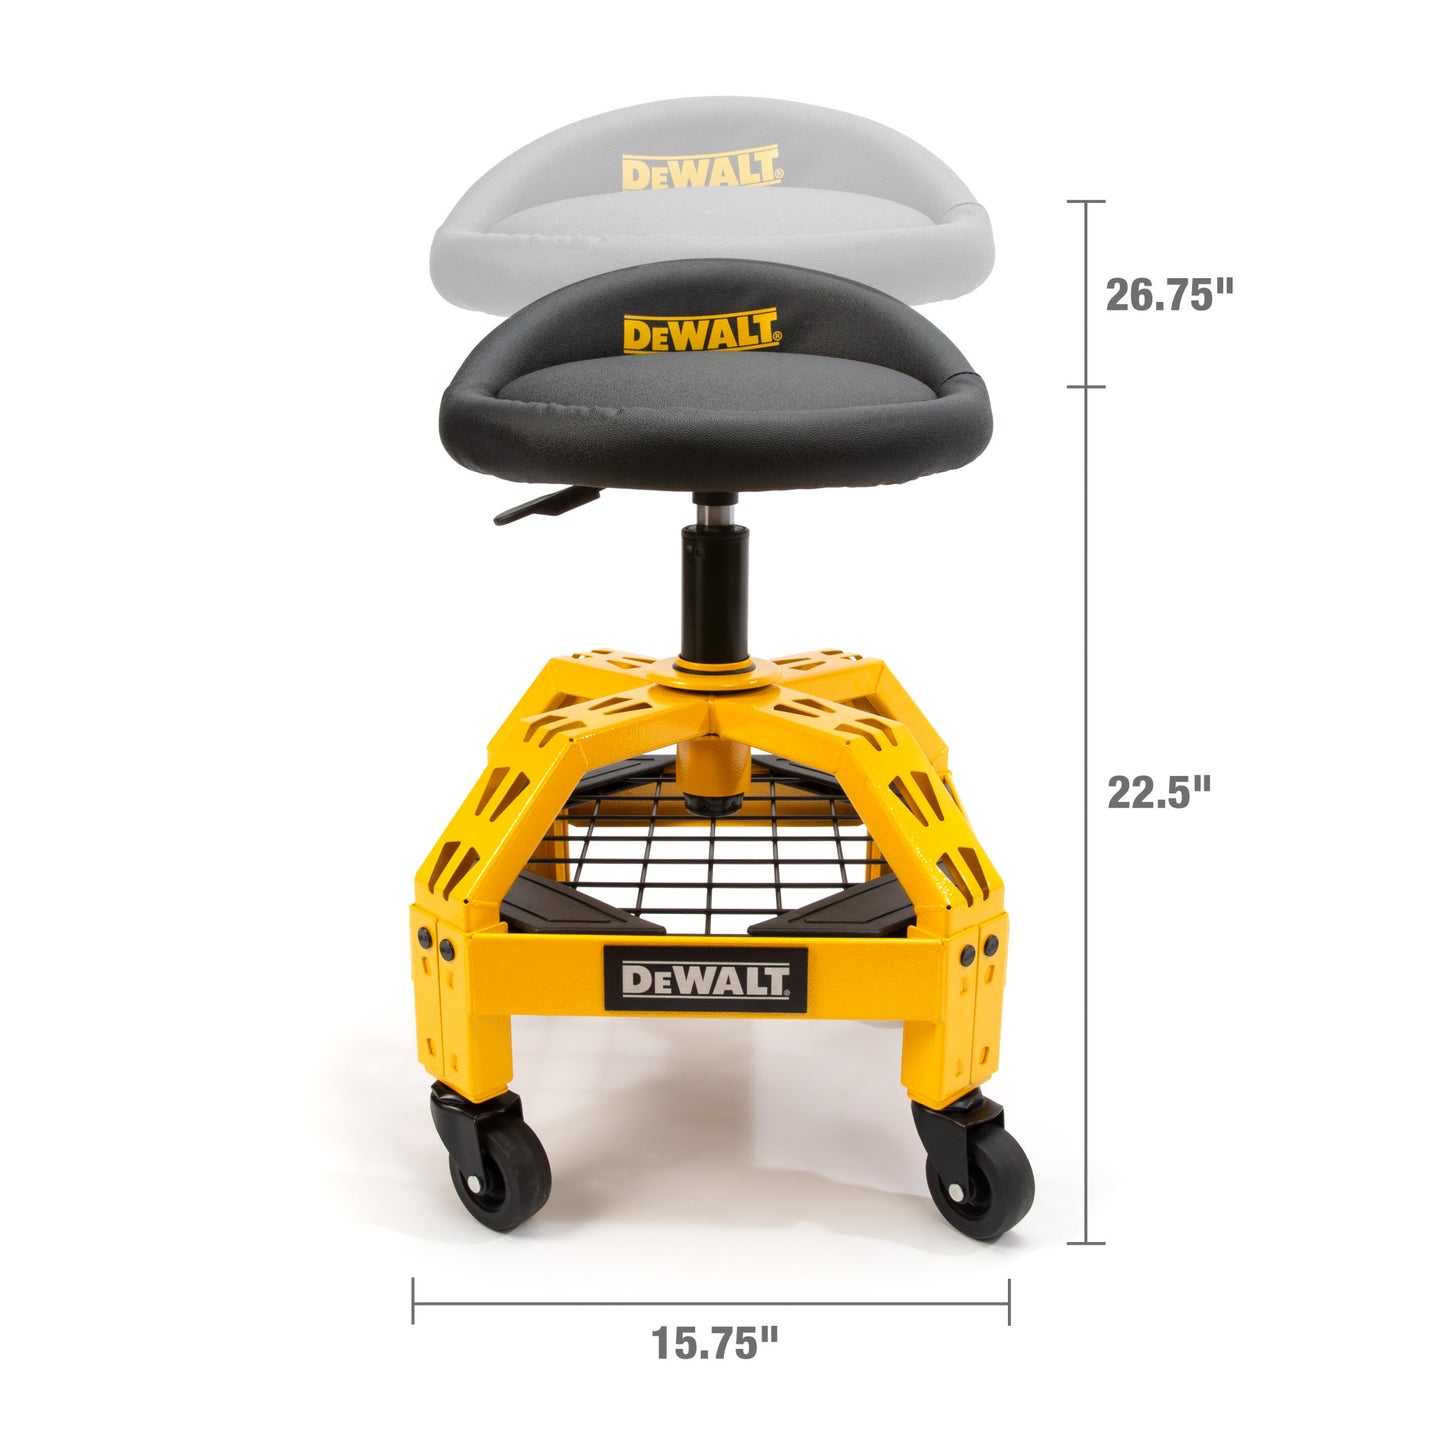 Adjustable Shop Stool with Casters